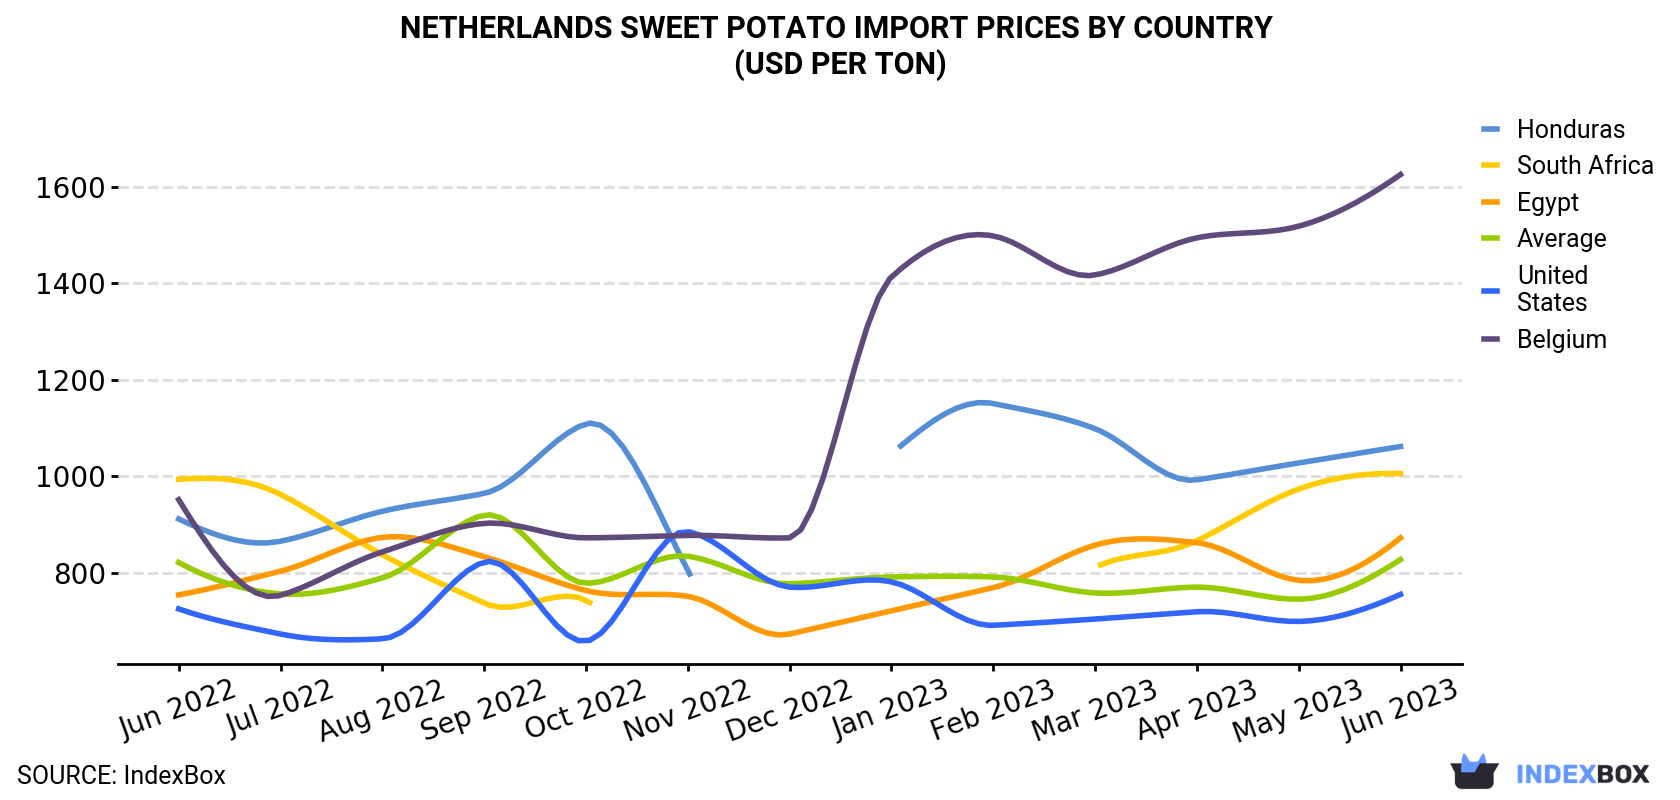 Netherlands Sweet Potato Import Prices By Country (USD Per Ton)